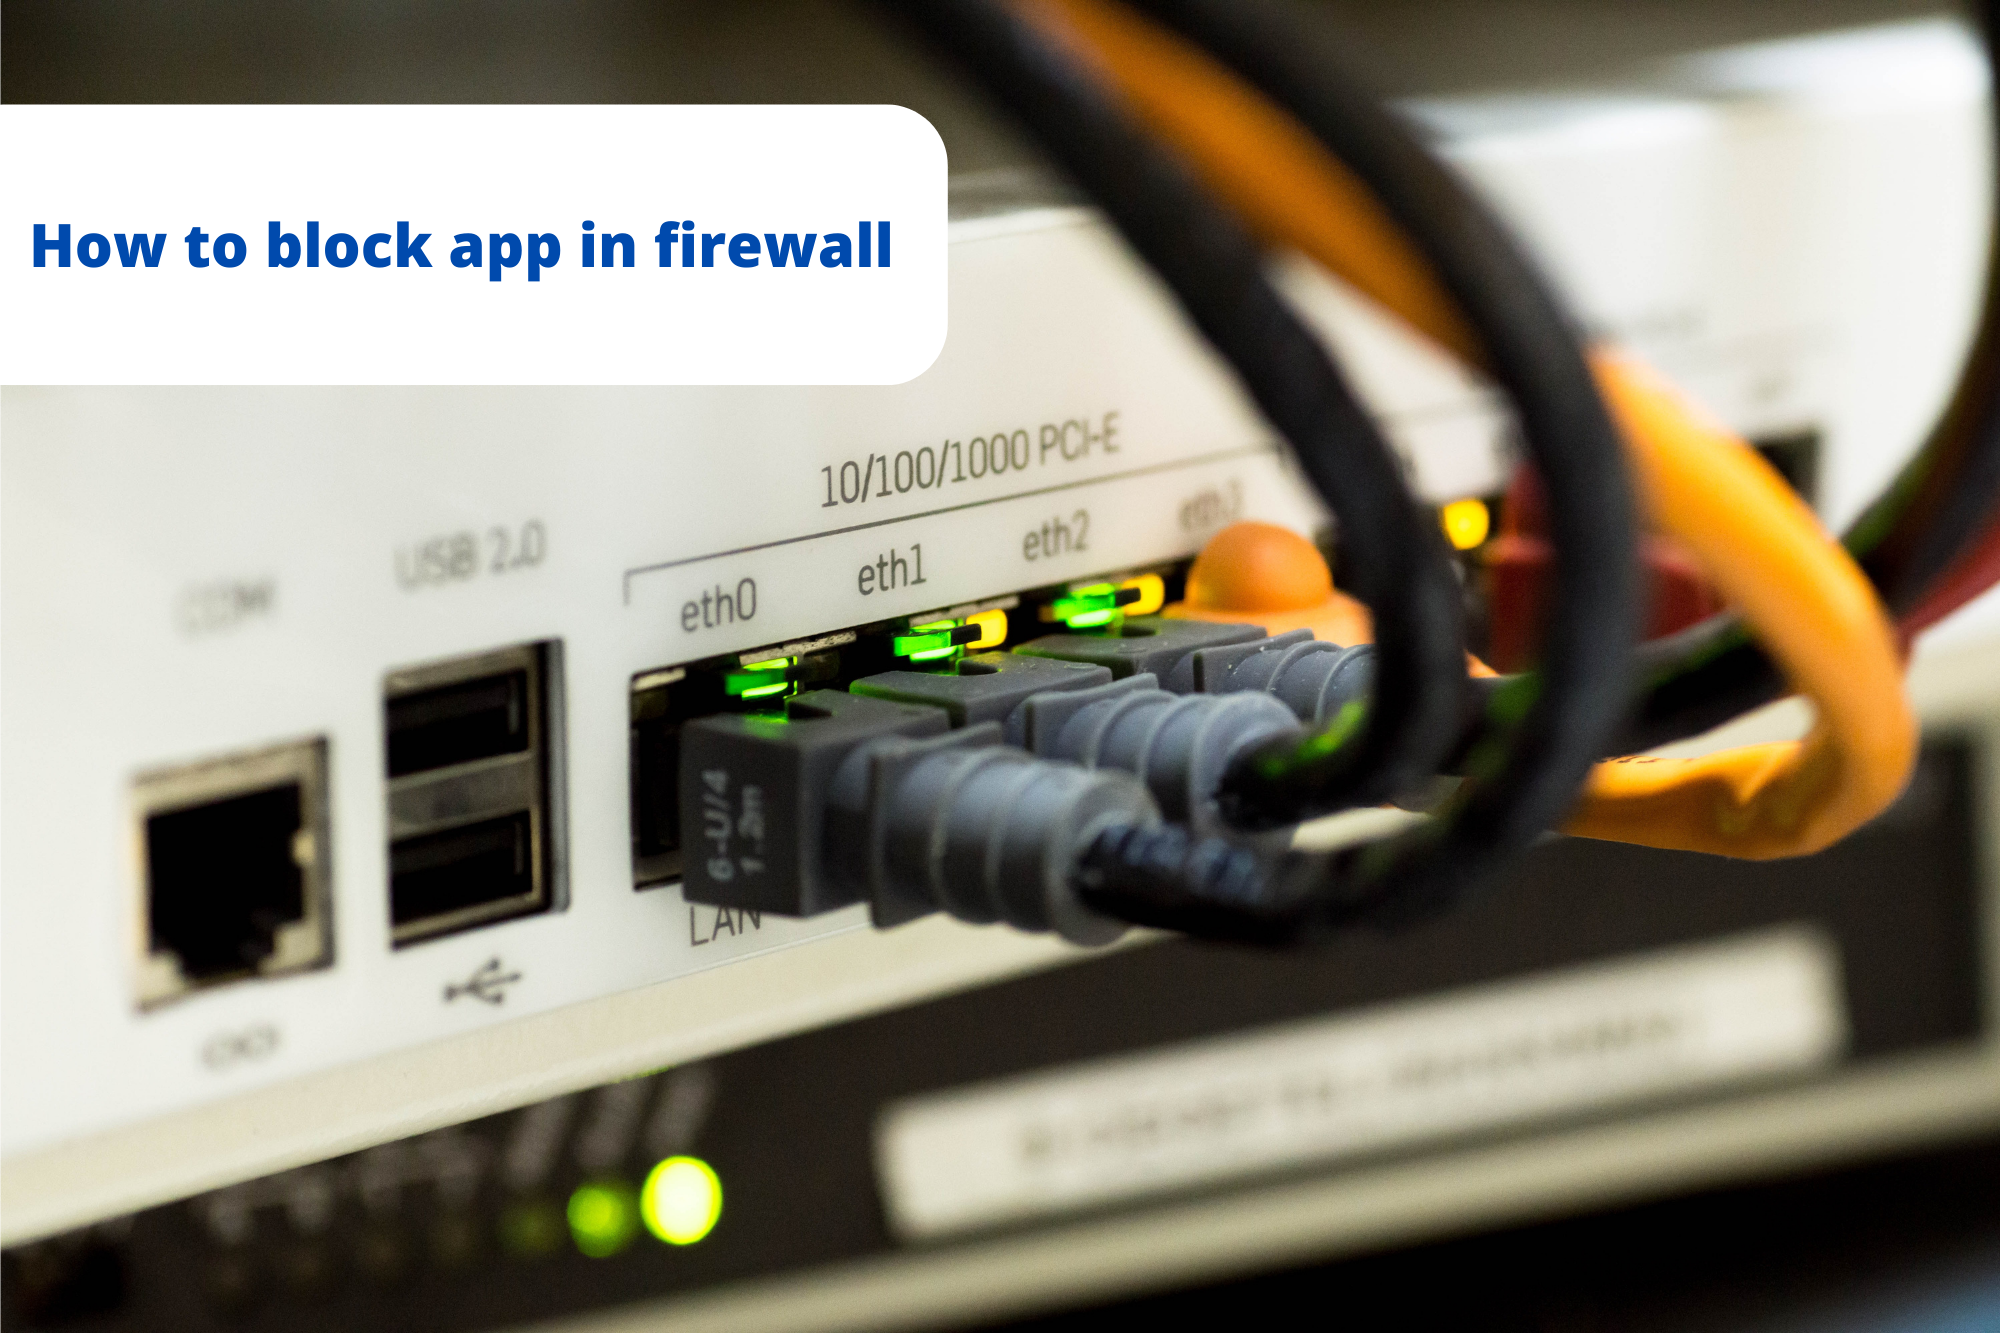 How to block app in firewall